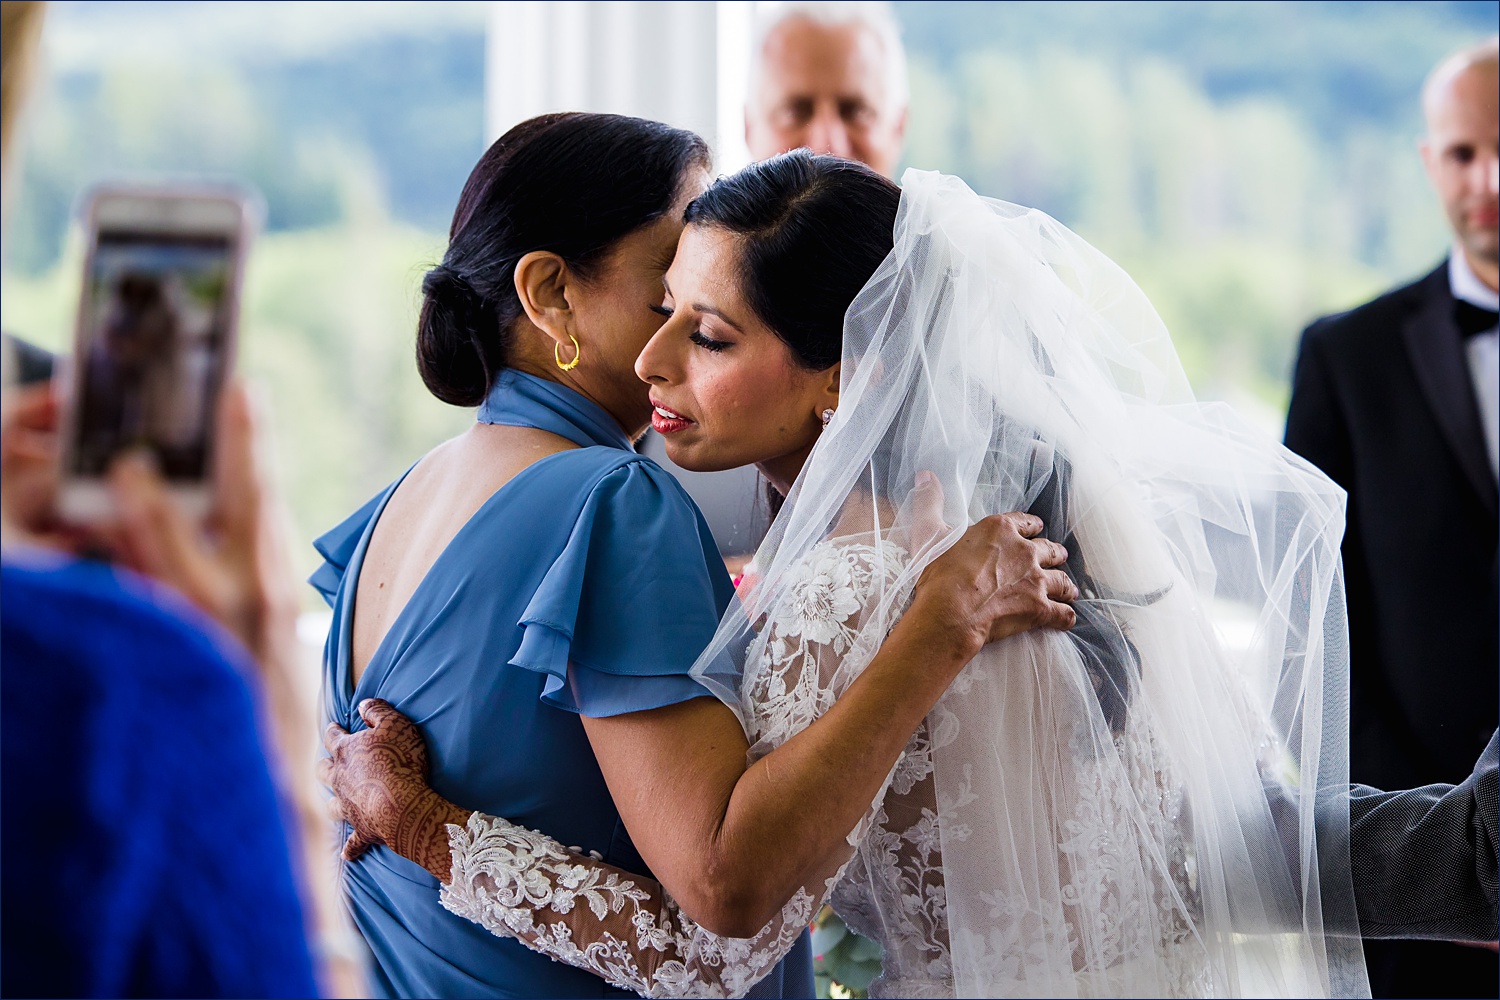 The bride hugs her parents before the wedding ceremony begins